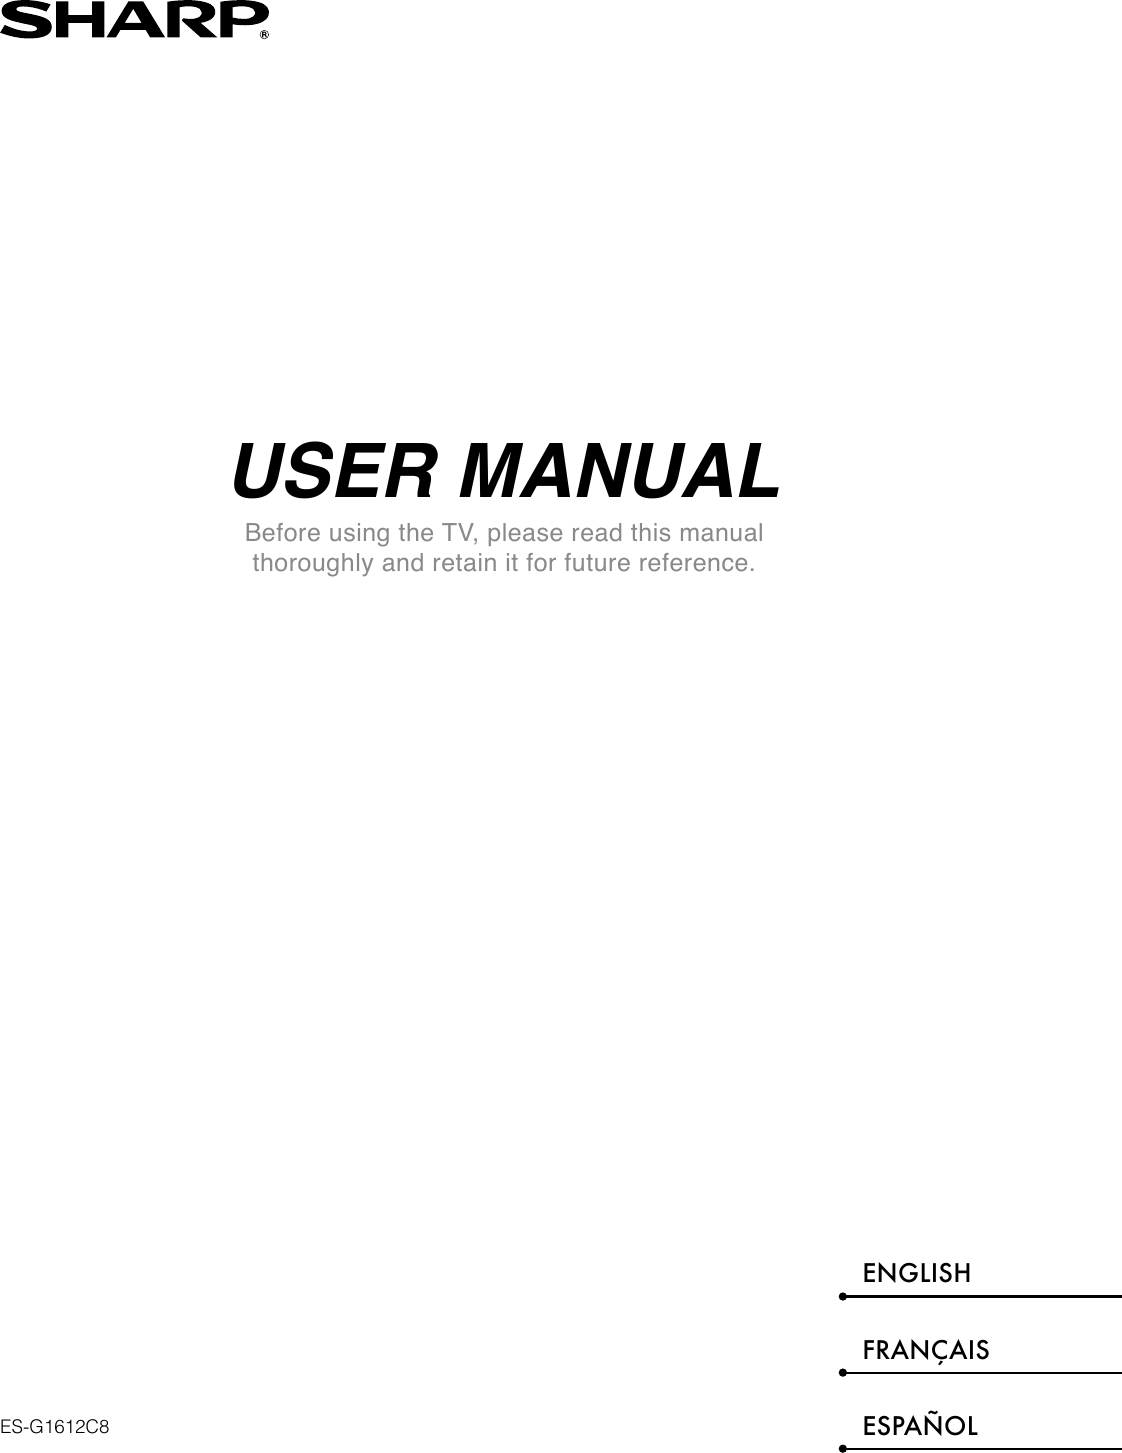 USER MANUALBefore using the TV, please read this manual thoroughly and retain it for future reference.ENGLISHFRANÇAISESPAÑOLES-G1612C8